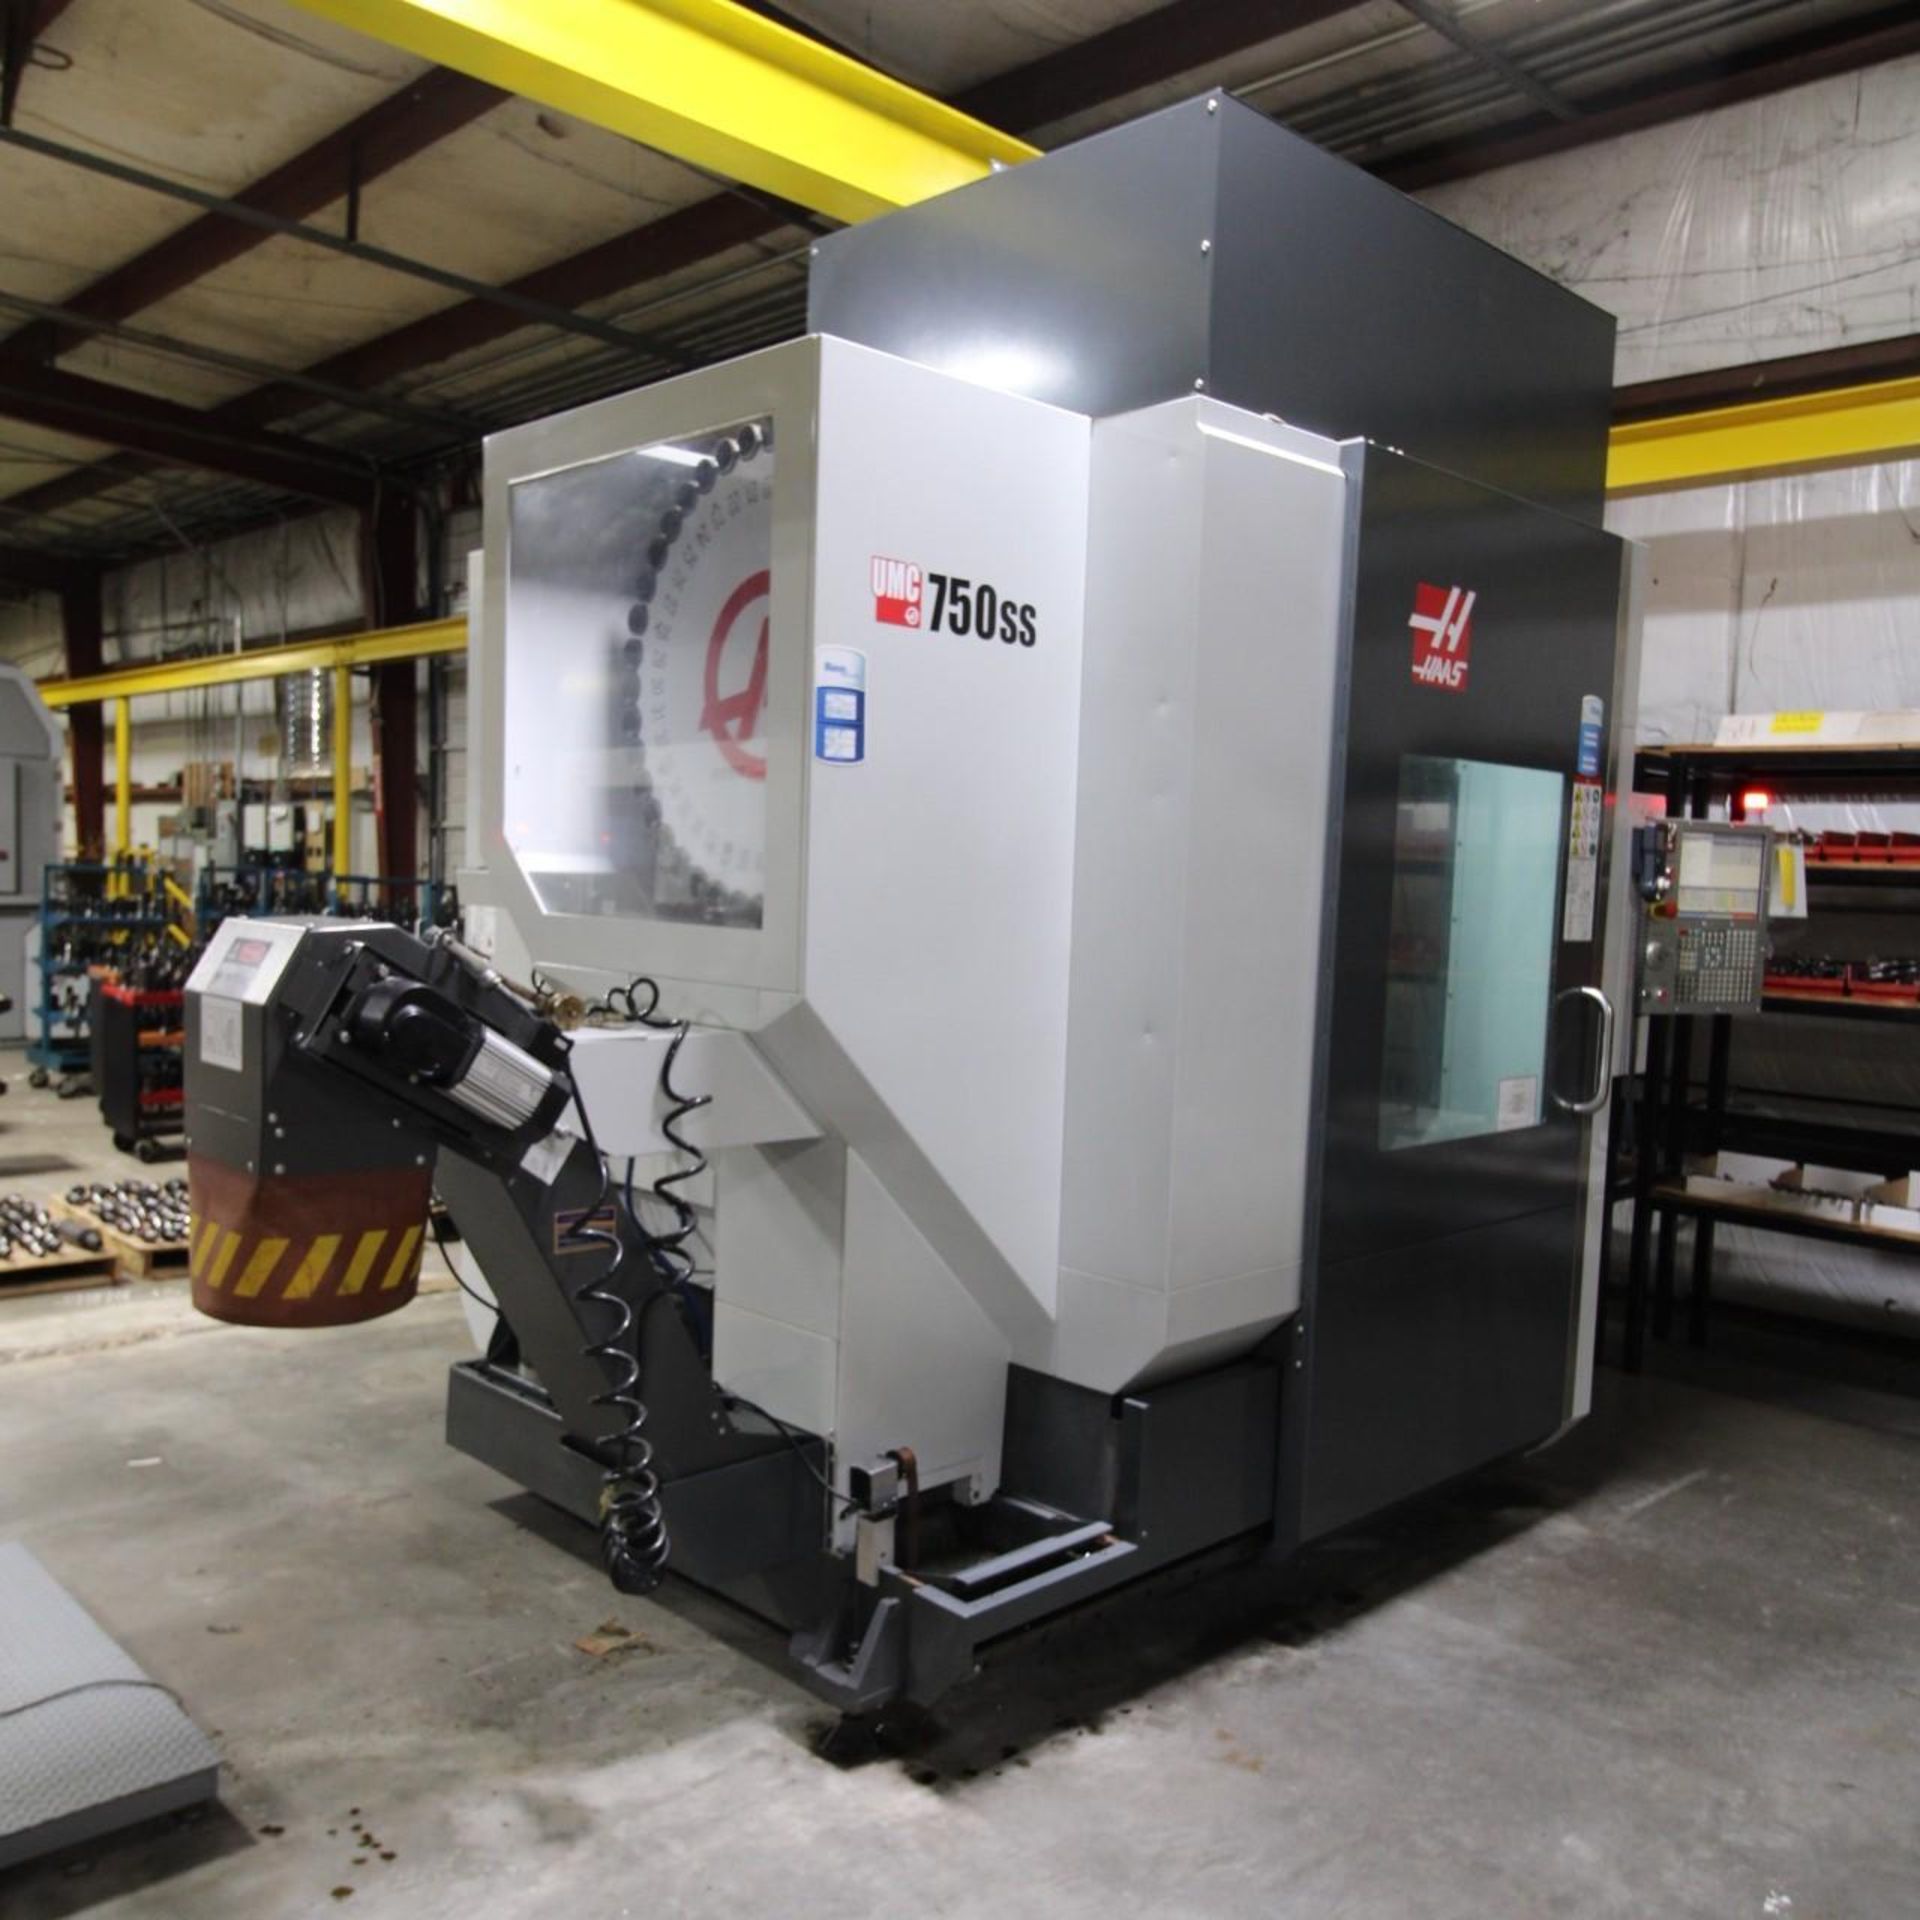 5-AXIS UNIVERSAL MACHINING CENTER, HAAS MDL. UMC750SS, new 2018, Haas CNC control, 30” X, 20” Y, 20”